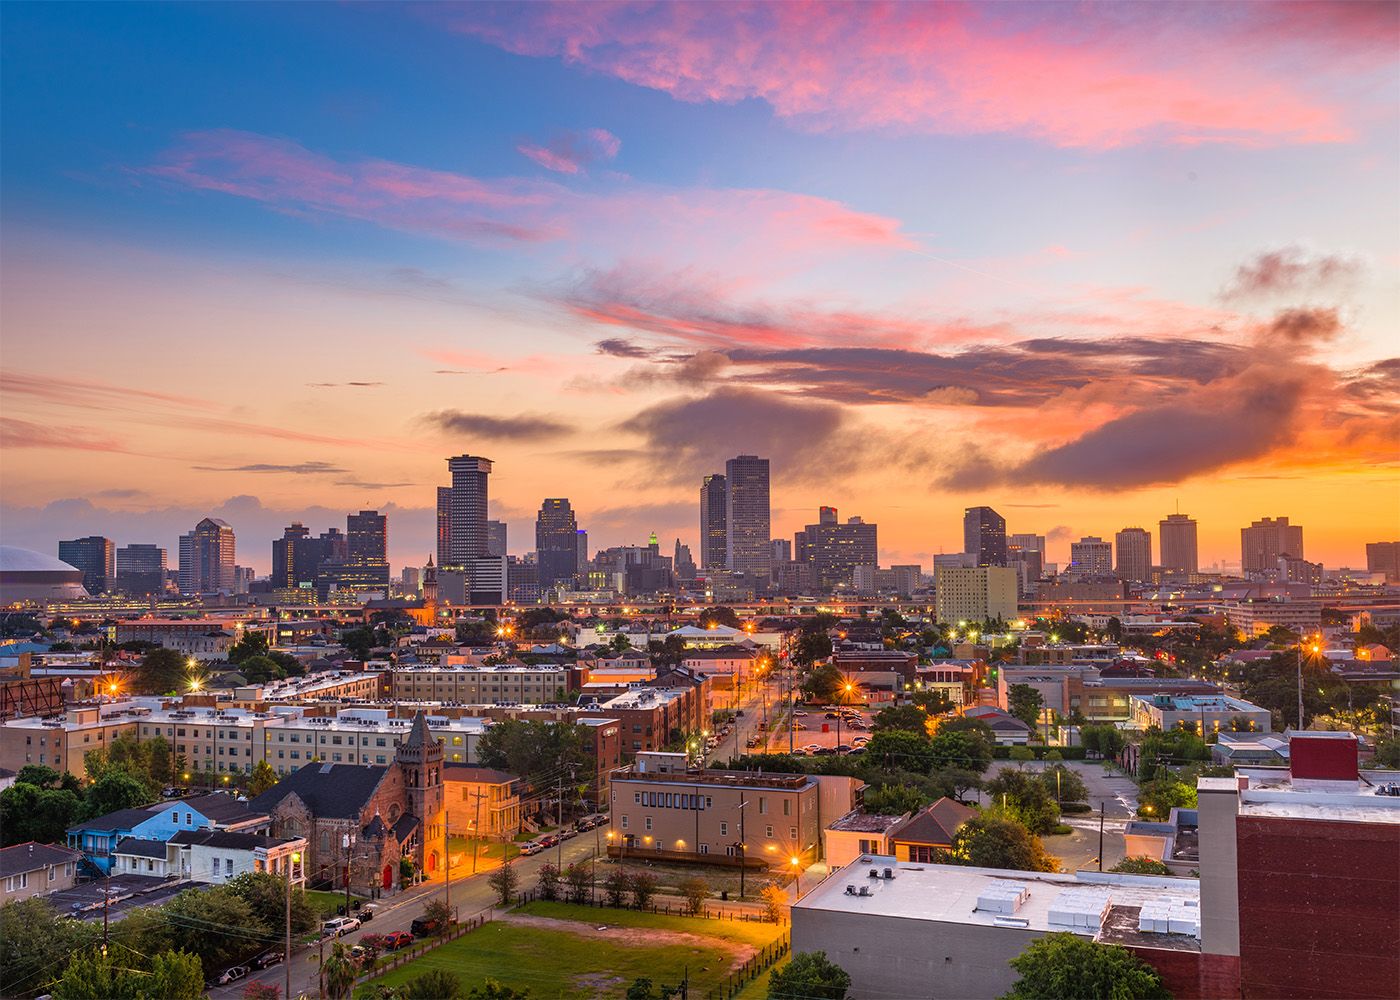 New Orleans skyline with a sunset in the background